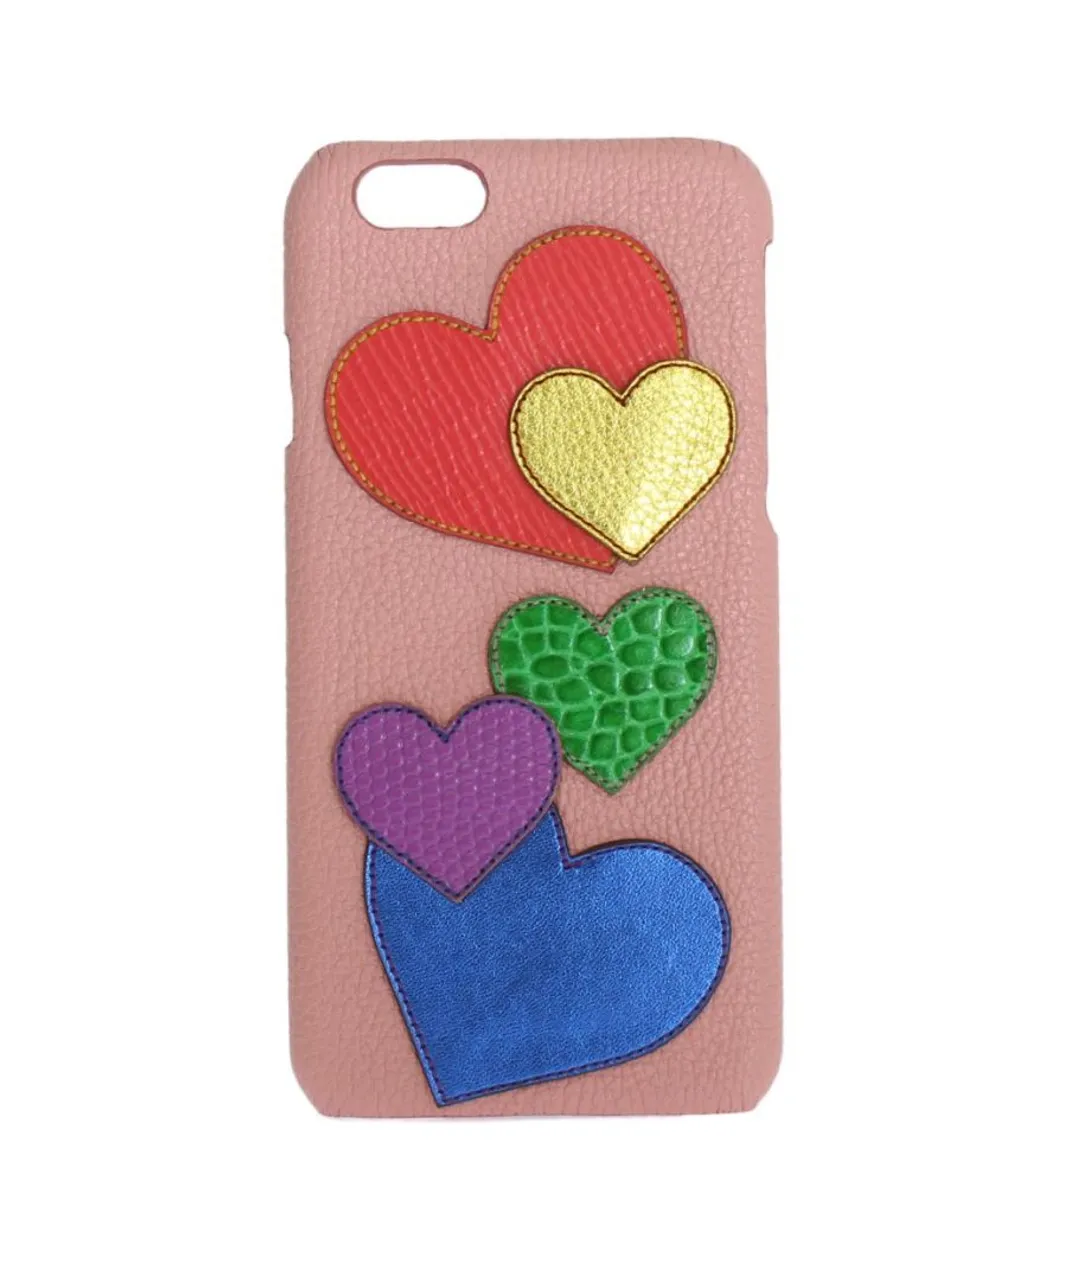 Dolce & Gabbana Womens Pink Leather Heart Phone Cover - Multicolour - One Size